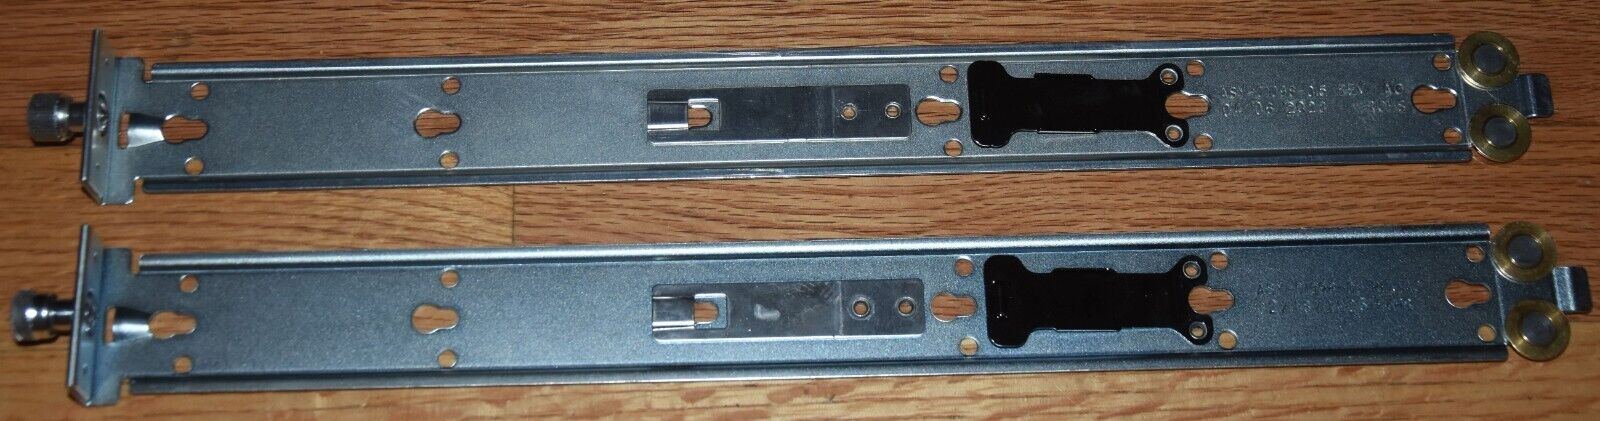 Arista inner tooled Rack Rails ASY-01098-05 - New without Box